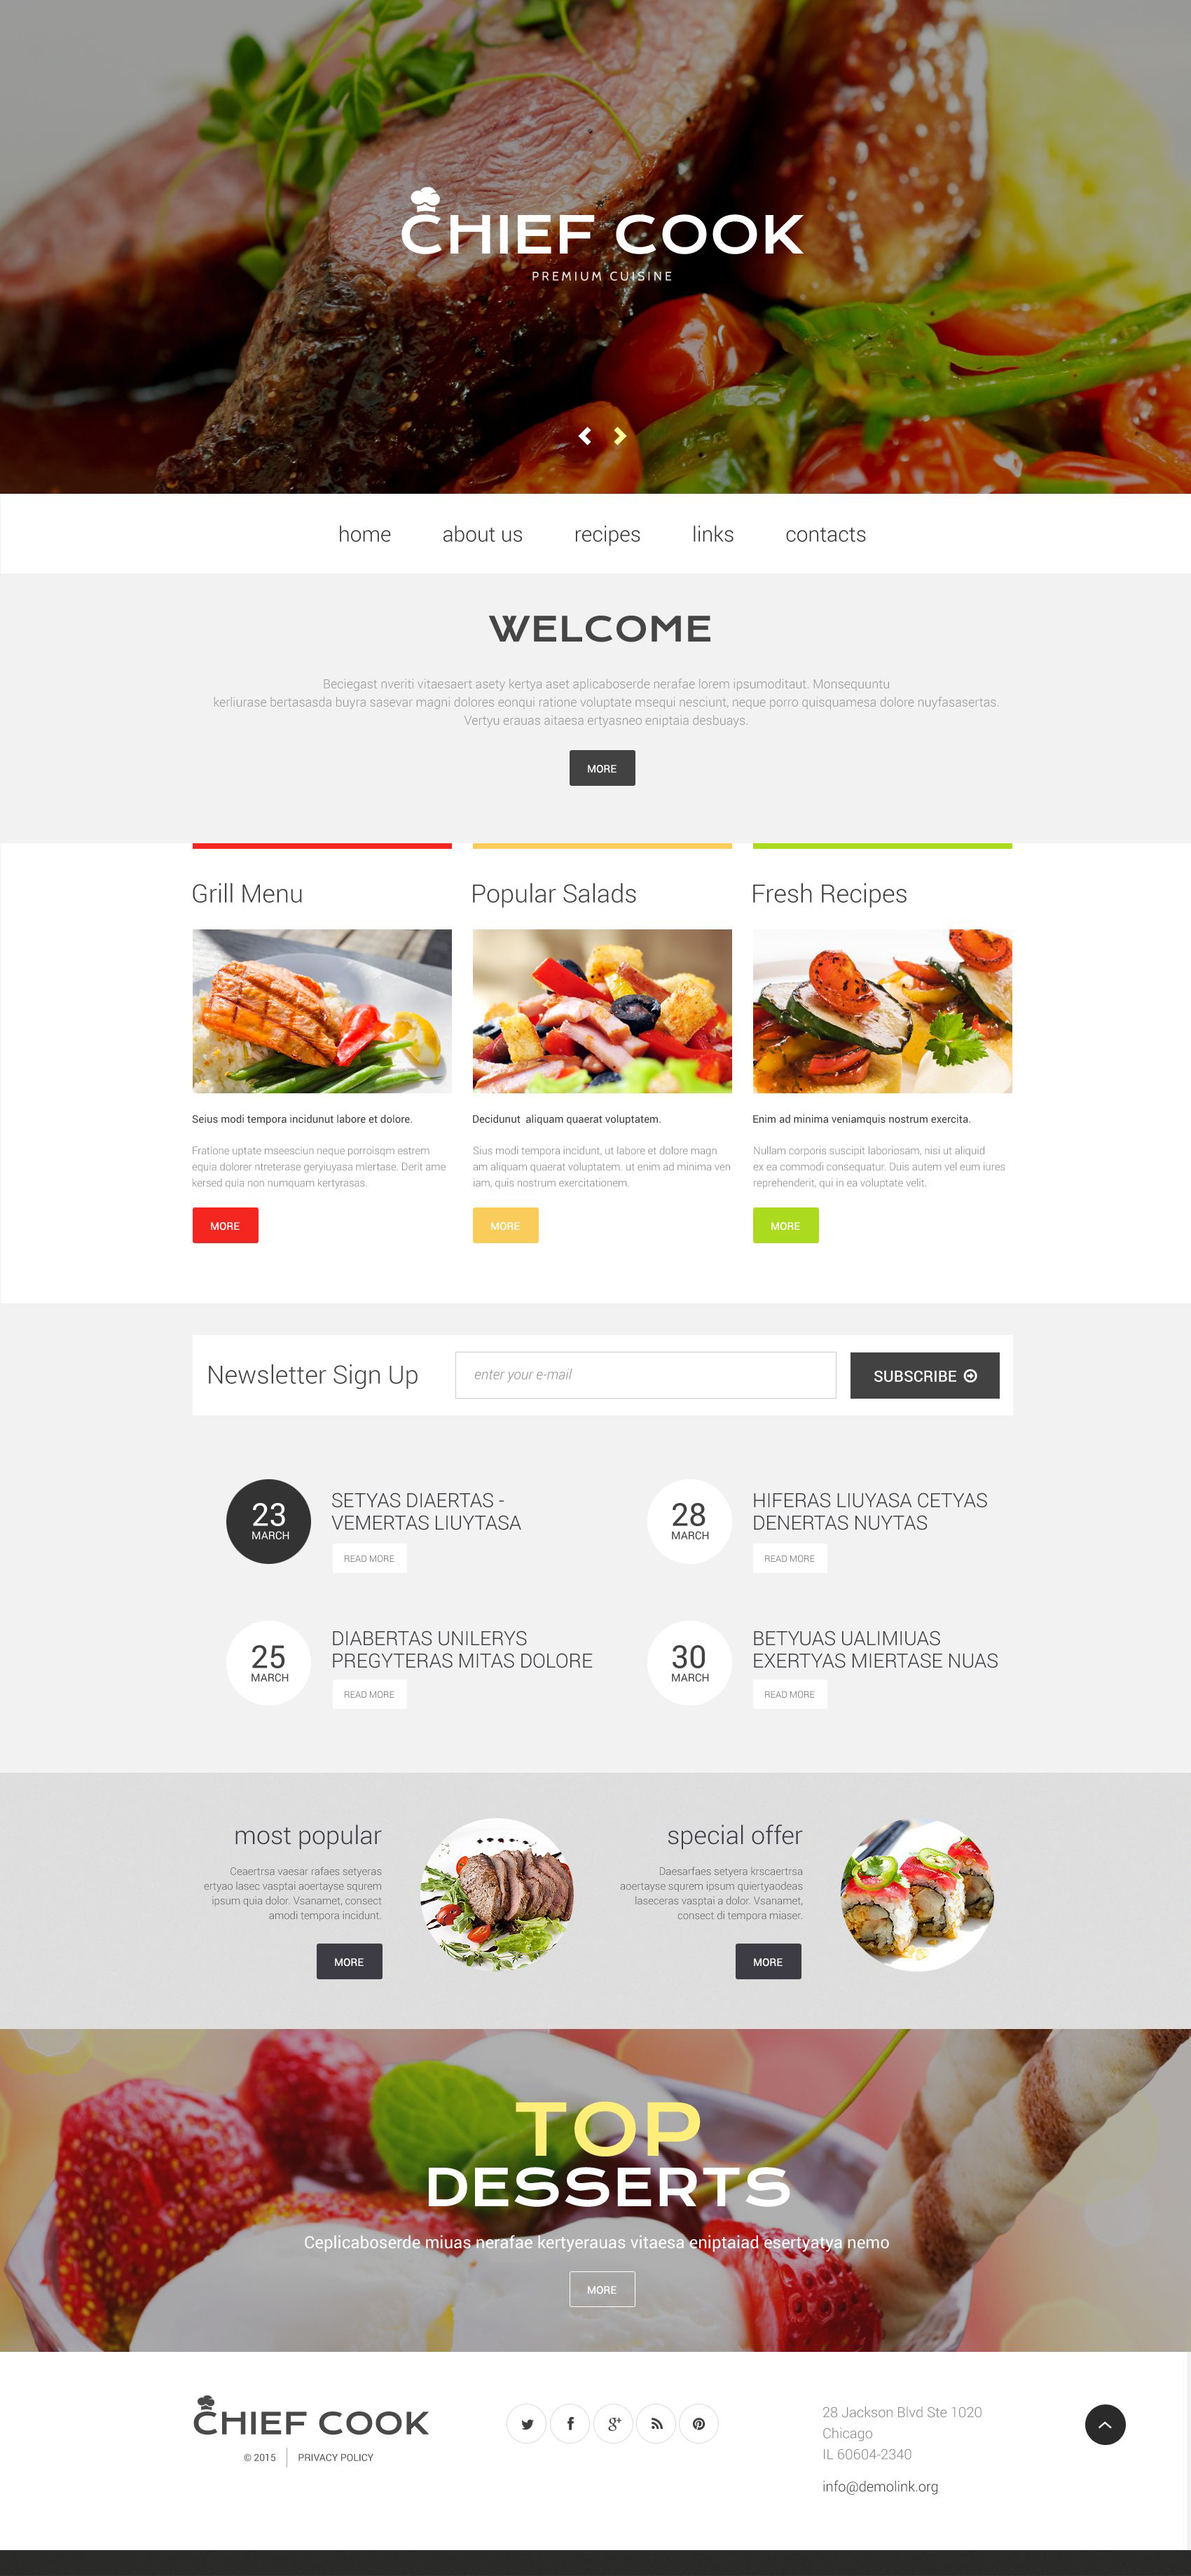 Chef Cook Site Website Template